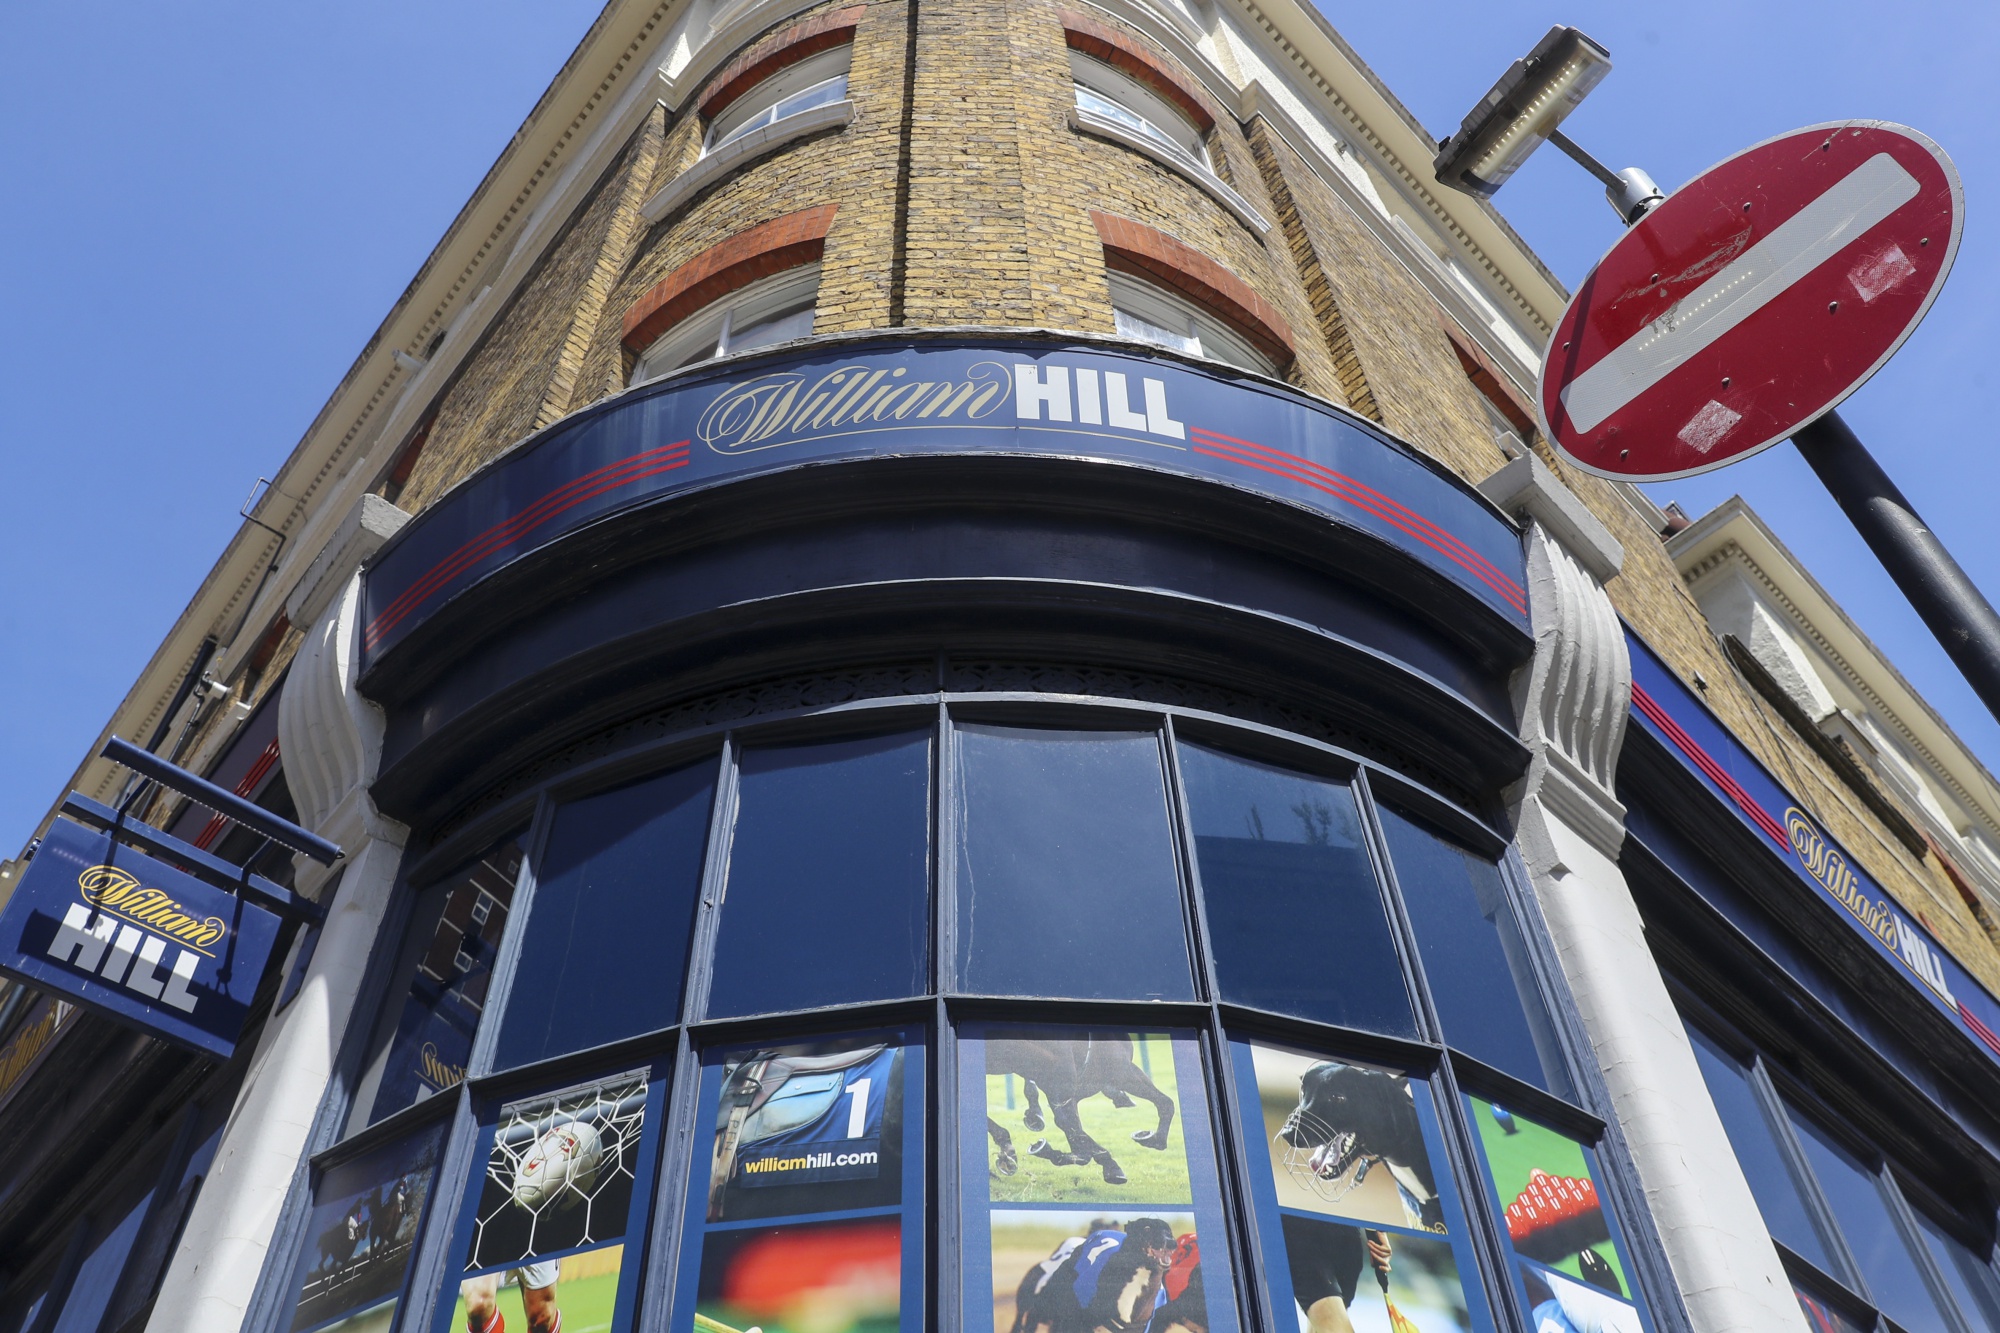 A William Hill betting shop in London.